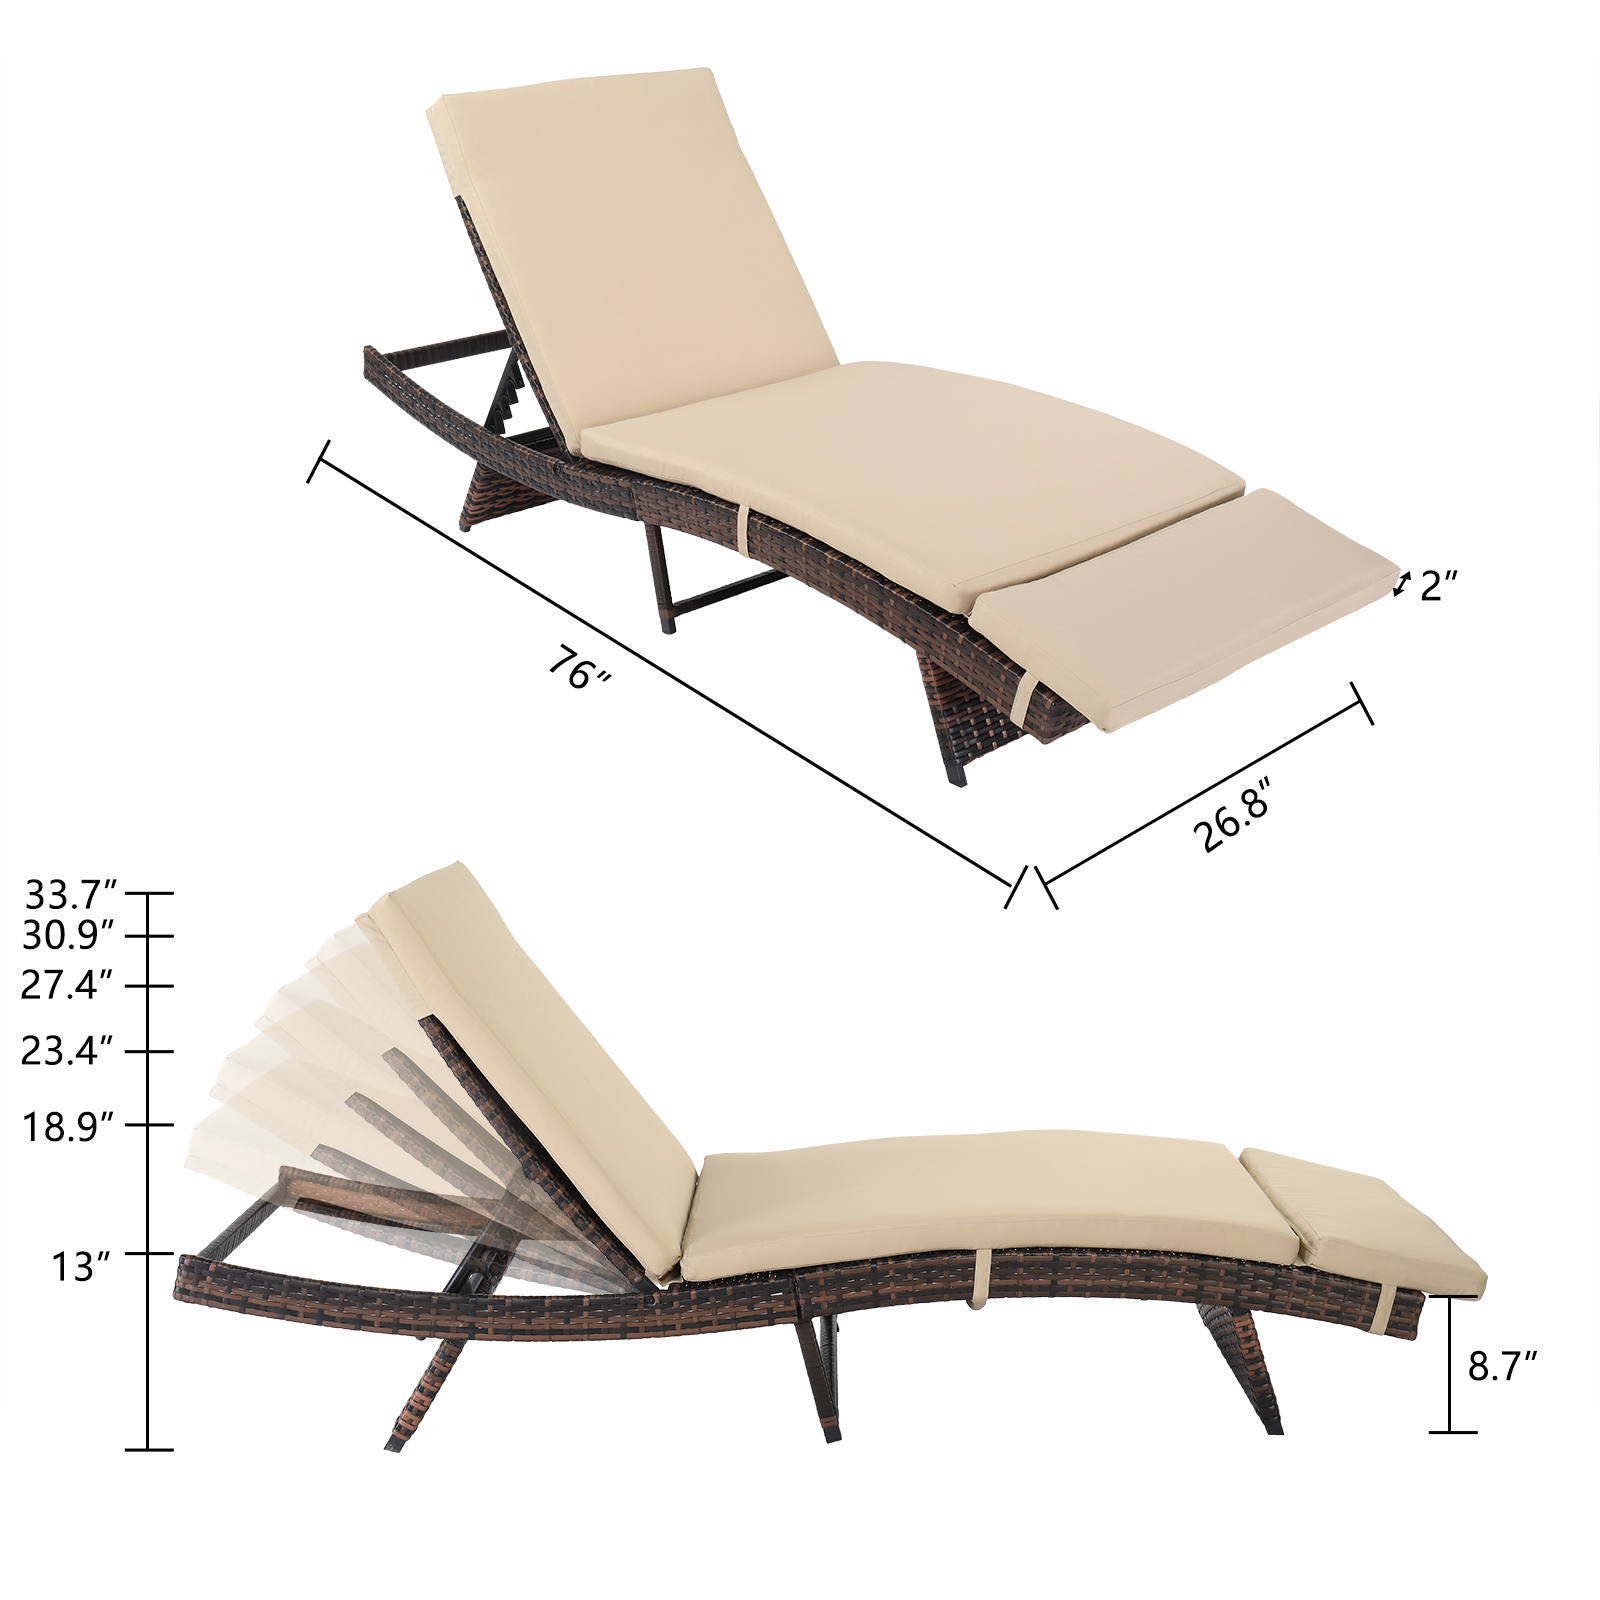 Patio Chaise Lounge Furniture, 5-Position Adjustable Cushioned Rattan Chaise, PE Wicker Backrest Lounger Chair, Suitable for Pool Balcony Deck Yard Garden, B27 - image 5 of 9